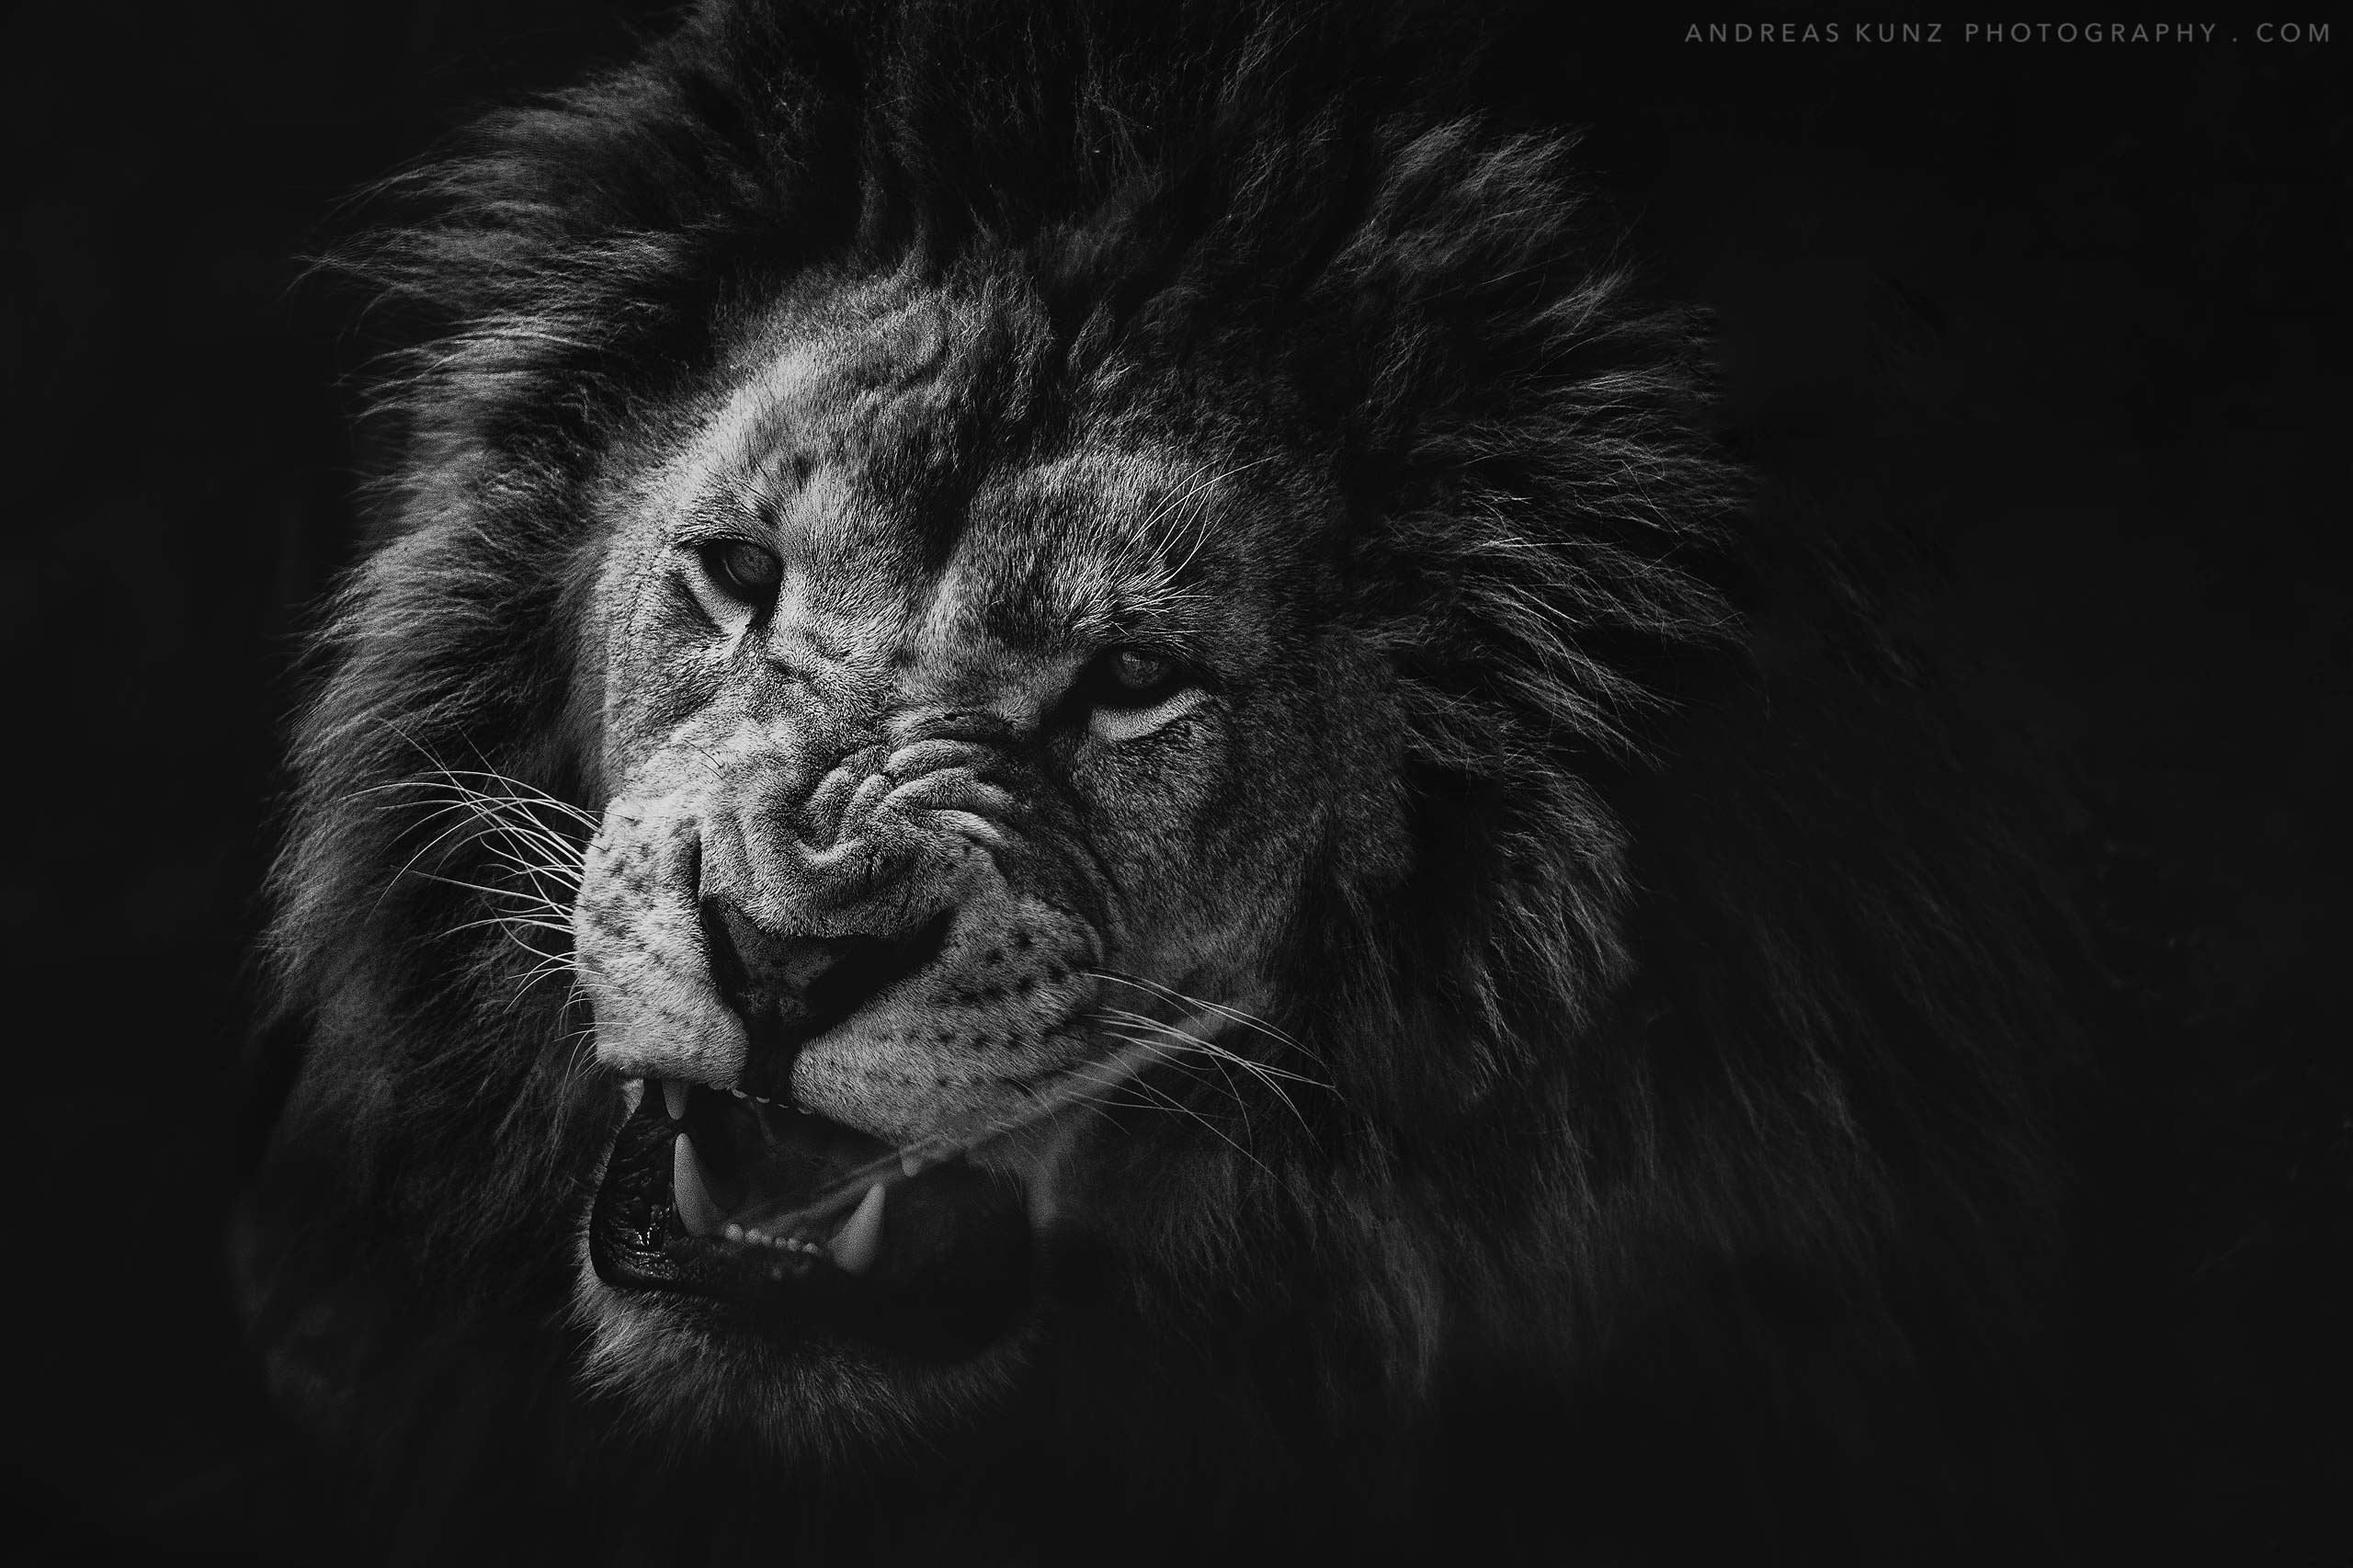 Black and White - Animals - andreaskunzphotography.com